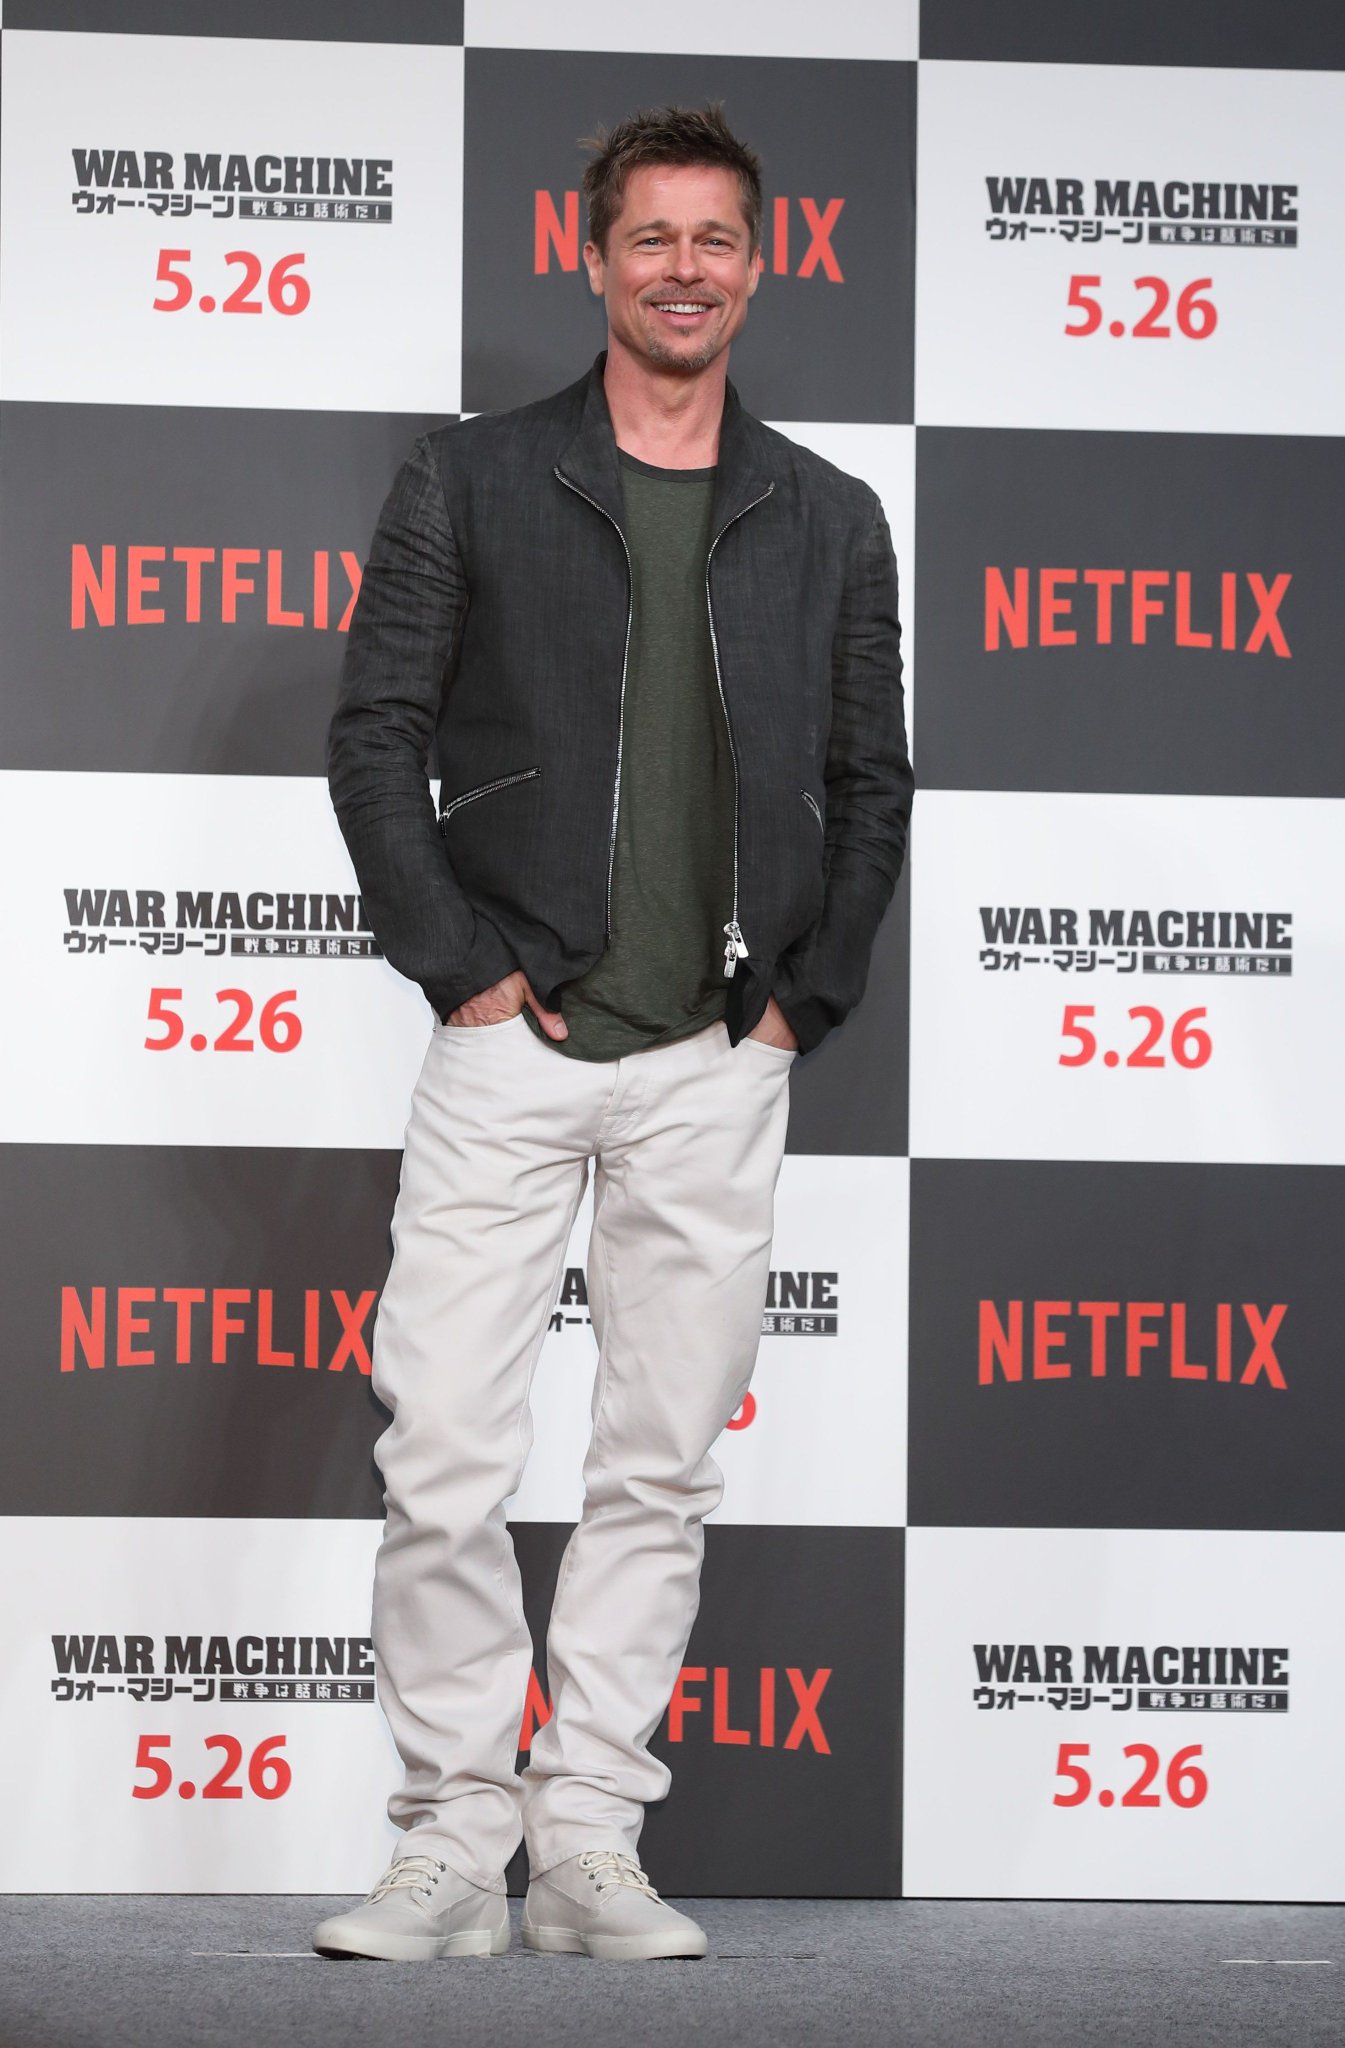 Timberland on Twitter: "Brad Pitt in #TimberlandxThread Newport Bay Chukkas  at his premiere! More about our partnership w/ @ThreadIntl here:  https://t.co/ACLKw5Kgm5 https://t.co/Bx3dAol8wM" / Twitter